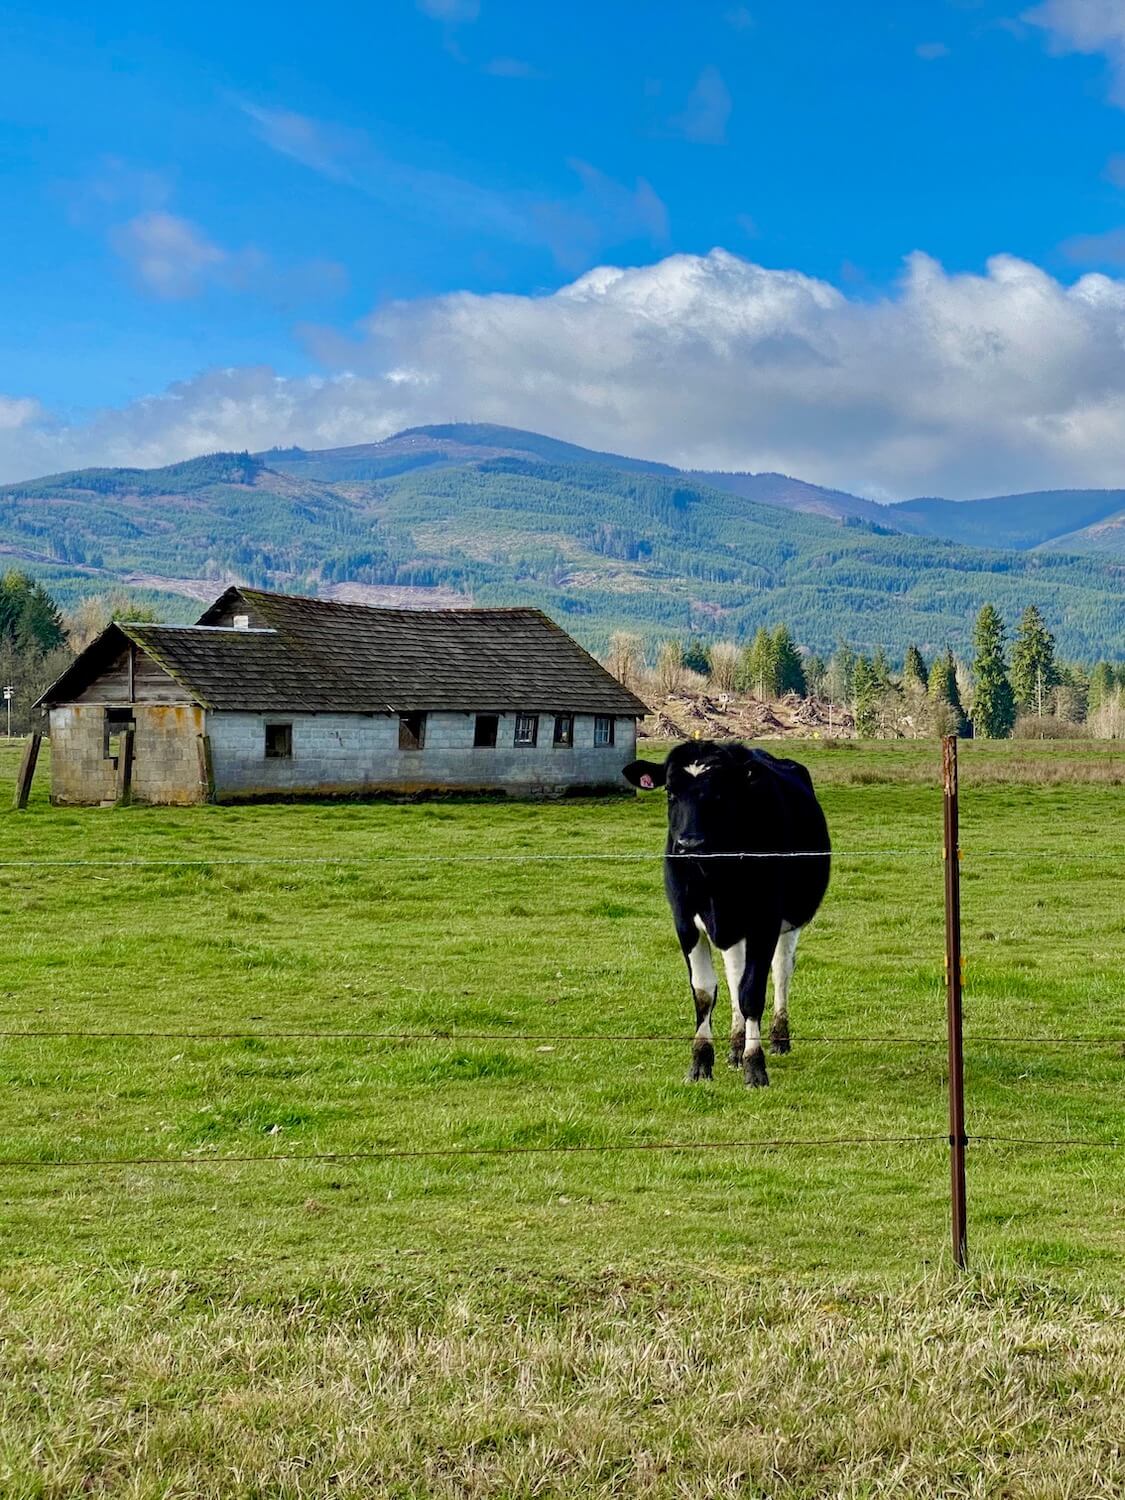 A holstein diary cow looks at the camera for this farm life shot. The cow is black with a white spot on the head and white legs. There is an abandoned pioneer house in the background surrounded by short green grass and rolling tree covered hills that frame in the blue sky on the horizon.